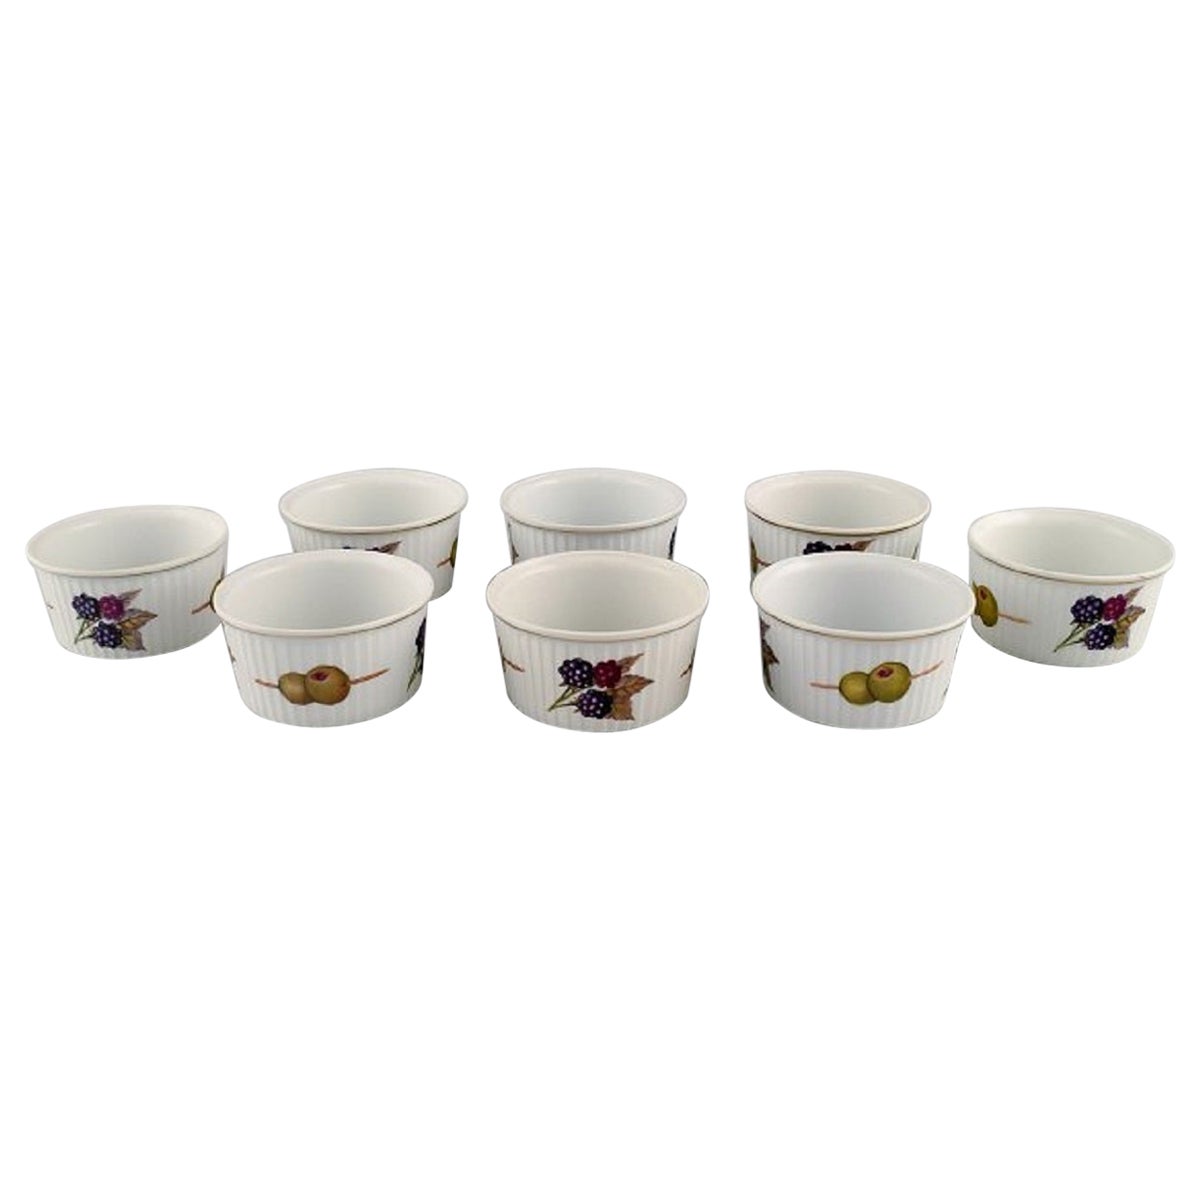 Royal Worcester, England, Eight Small Evesham Porcelain Bowls with Fruits